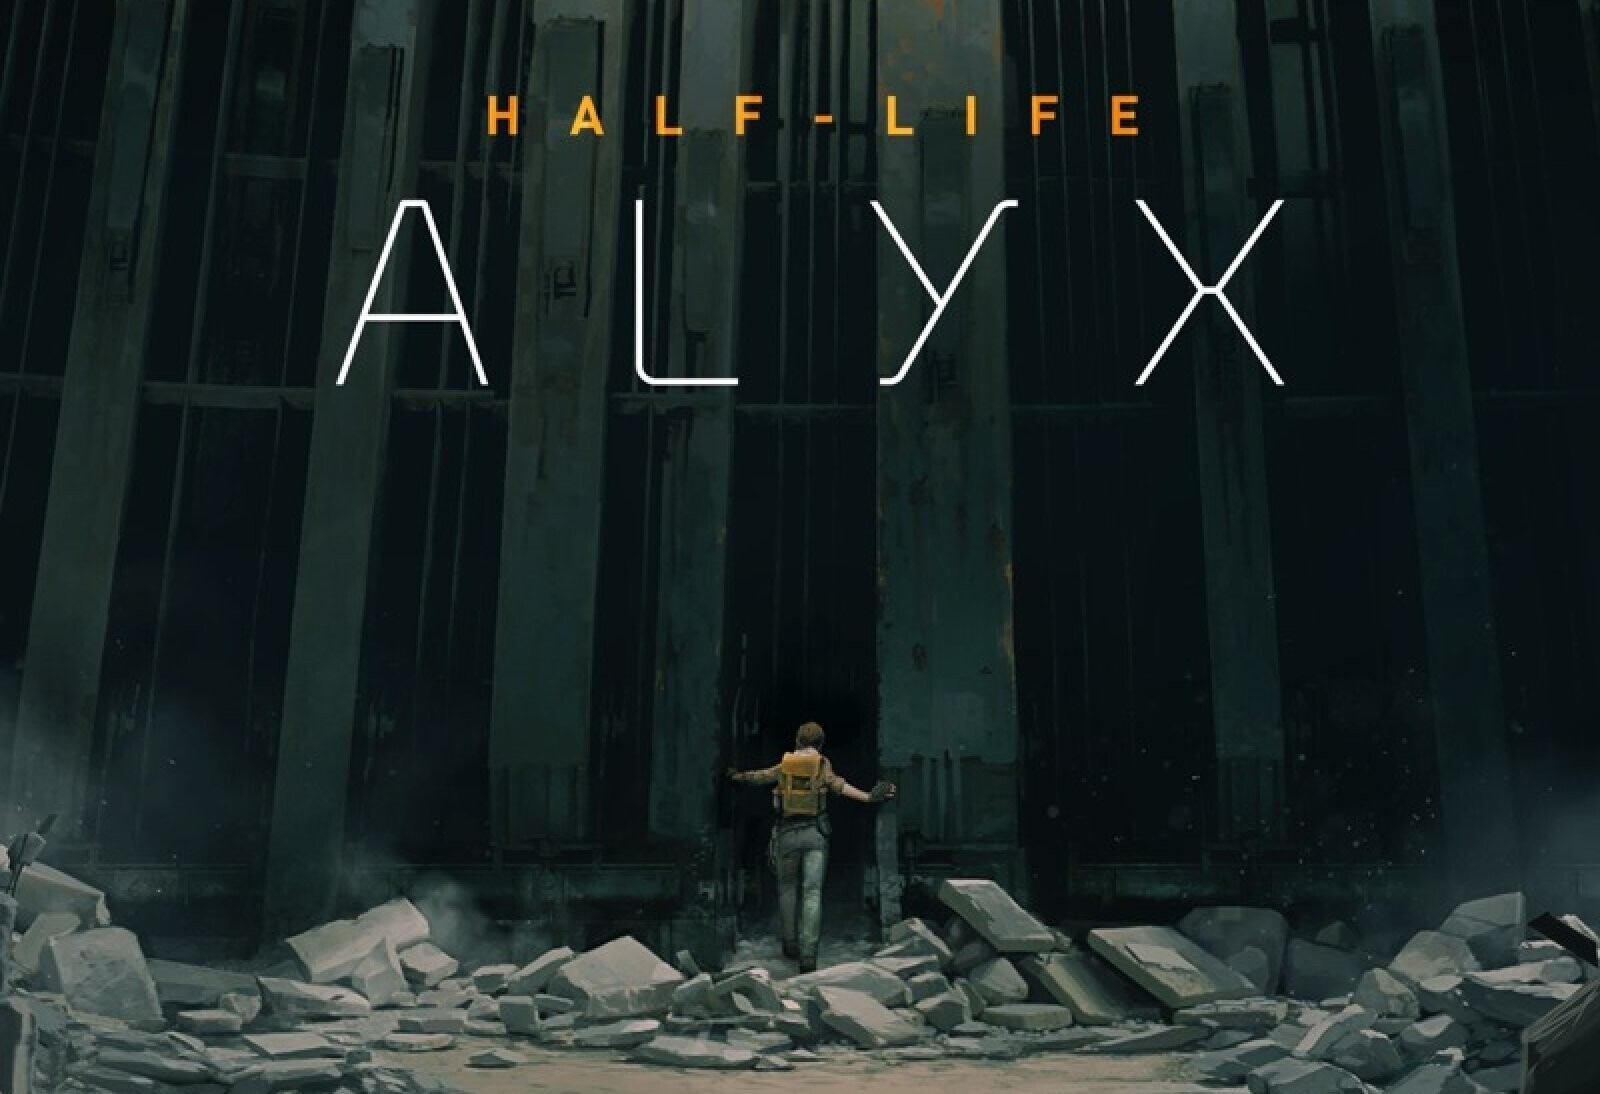 Gabe Newell Drops Subtle Half-Life 3 Hint During Valve Index Launch Party